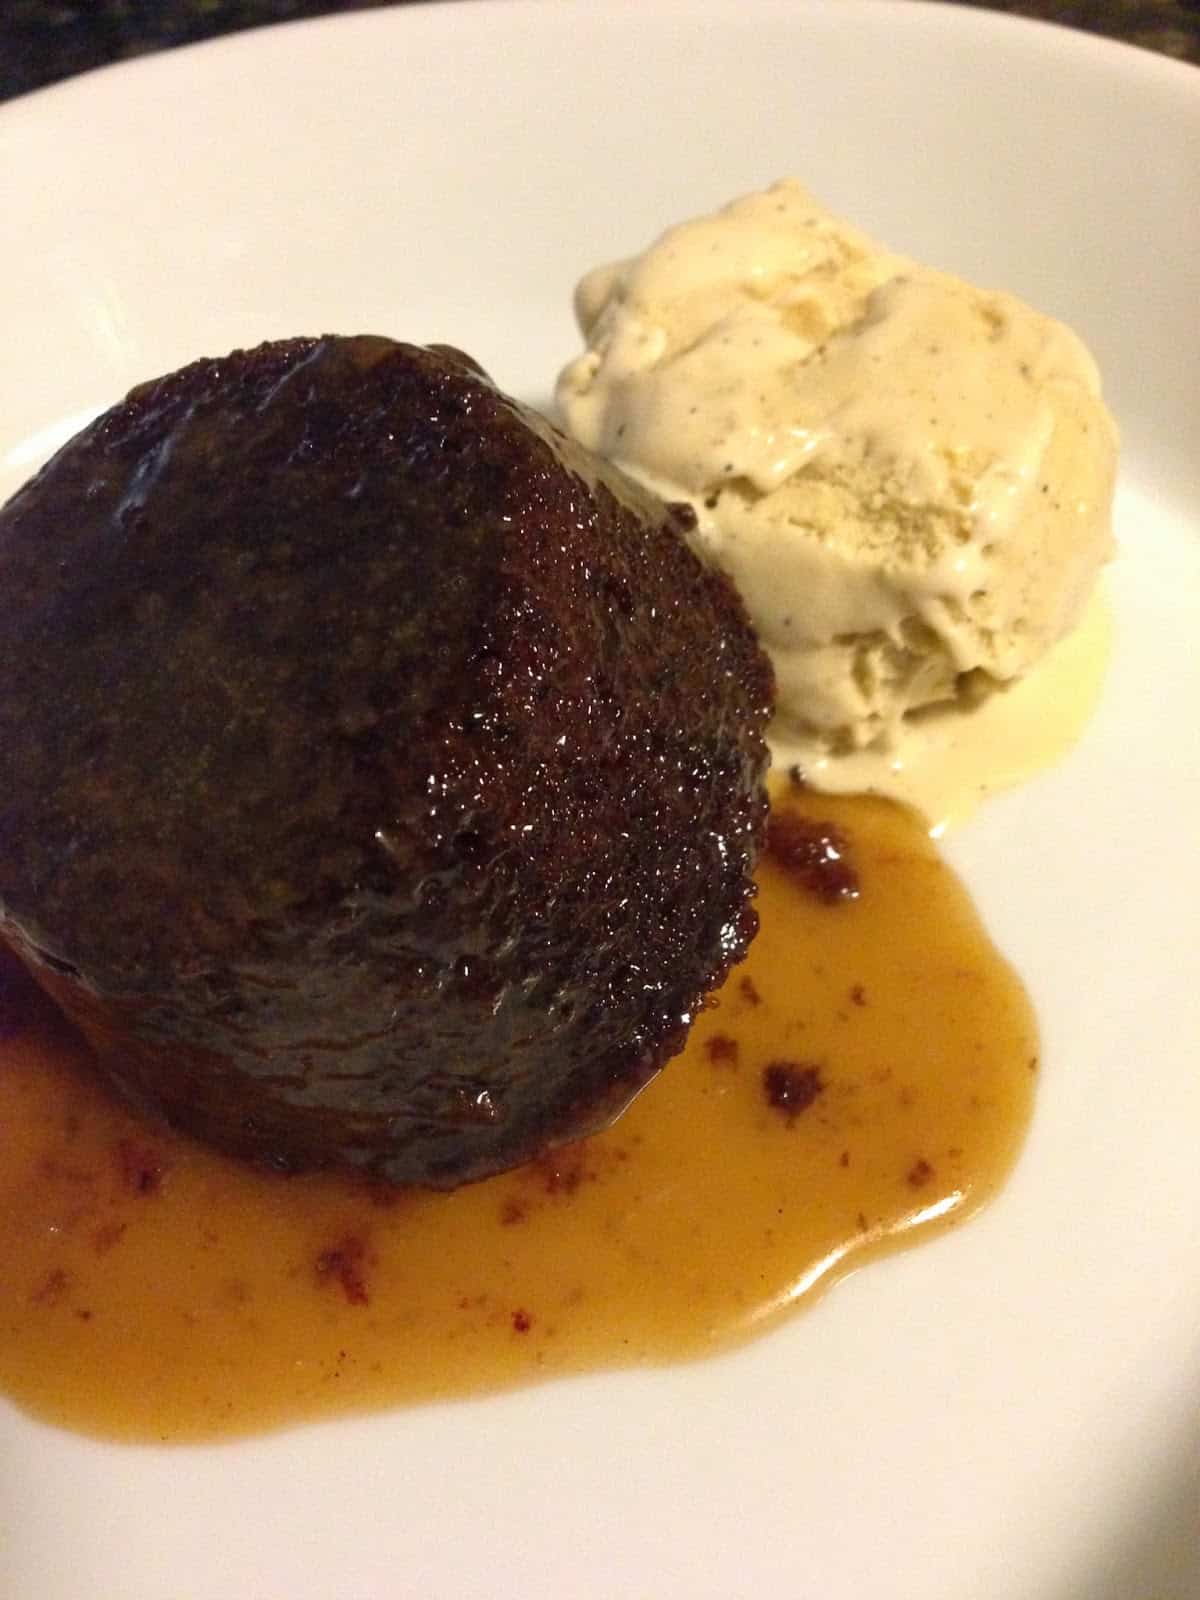 Sticky toffee pudding and black pepper ice cream